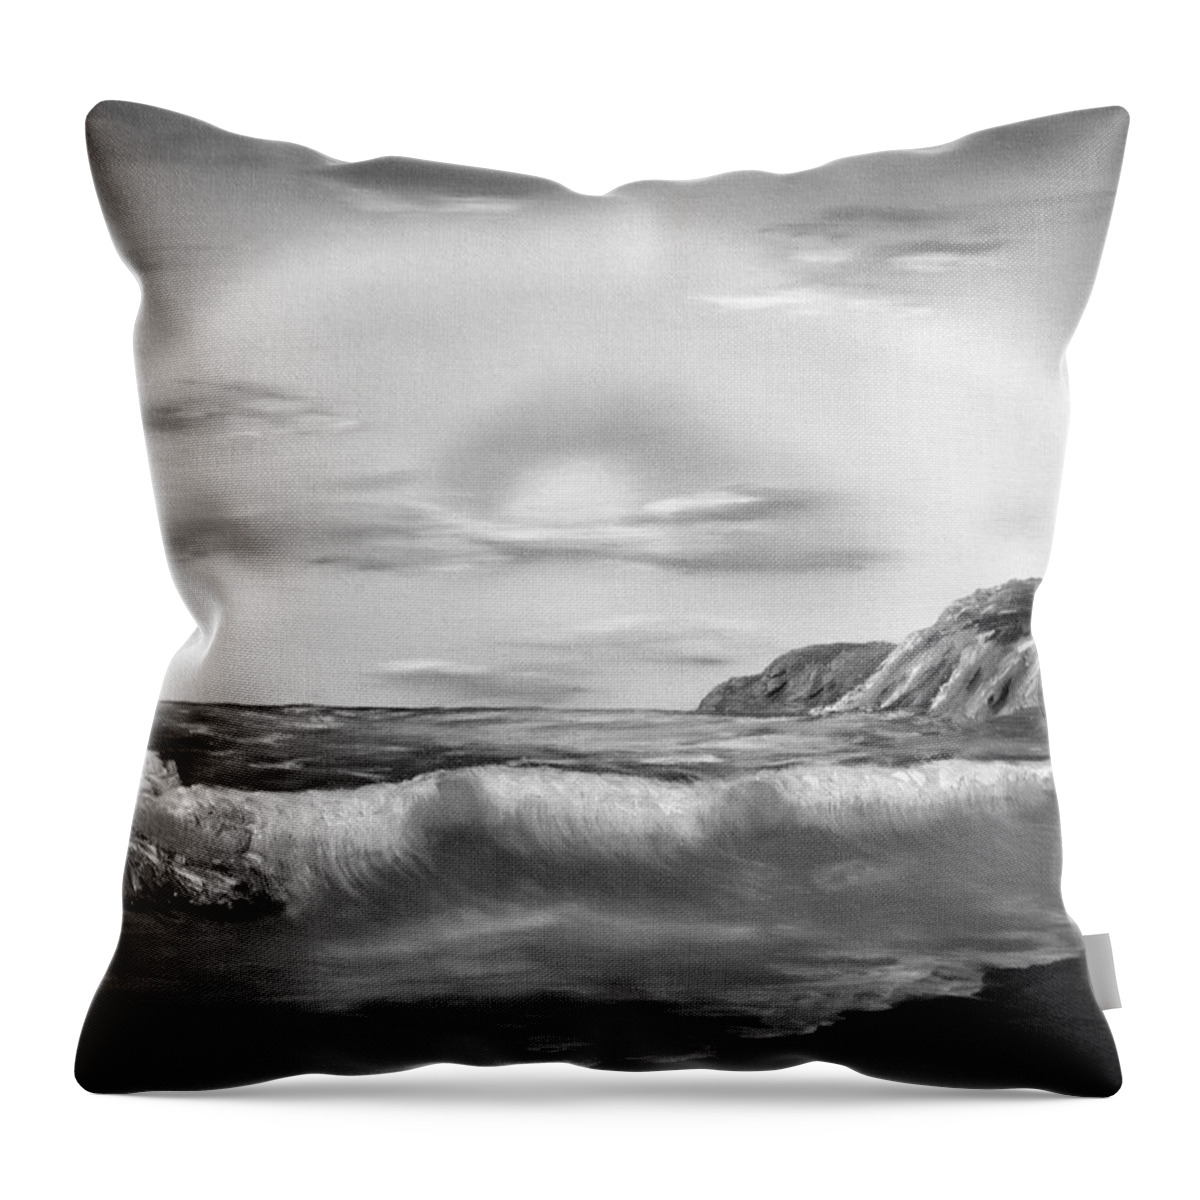 Black And White Throw Pillow featuring the painting Sunset Beach Pastel Splash In Black And White by Claude Beaulac